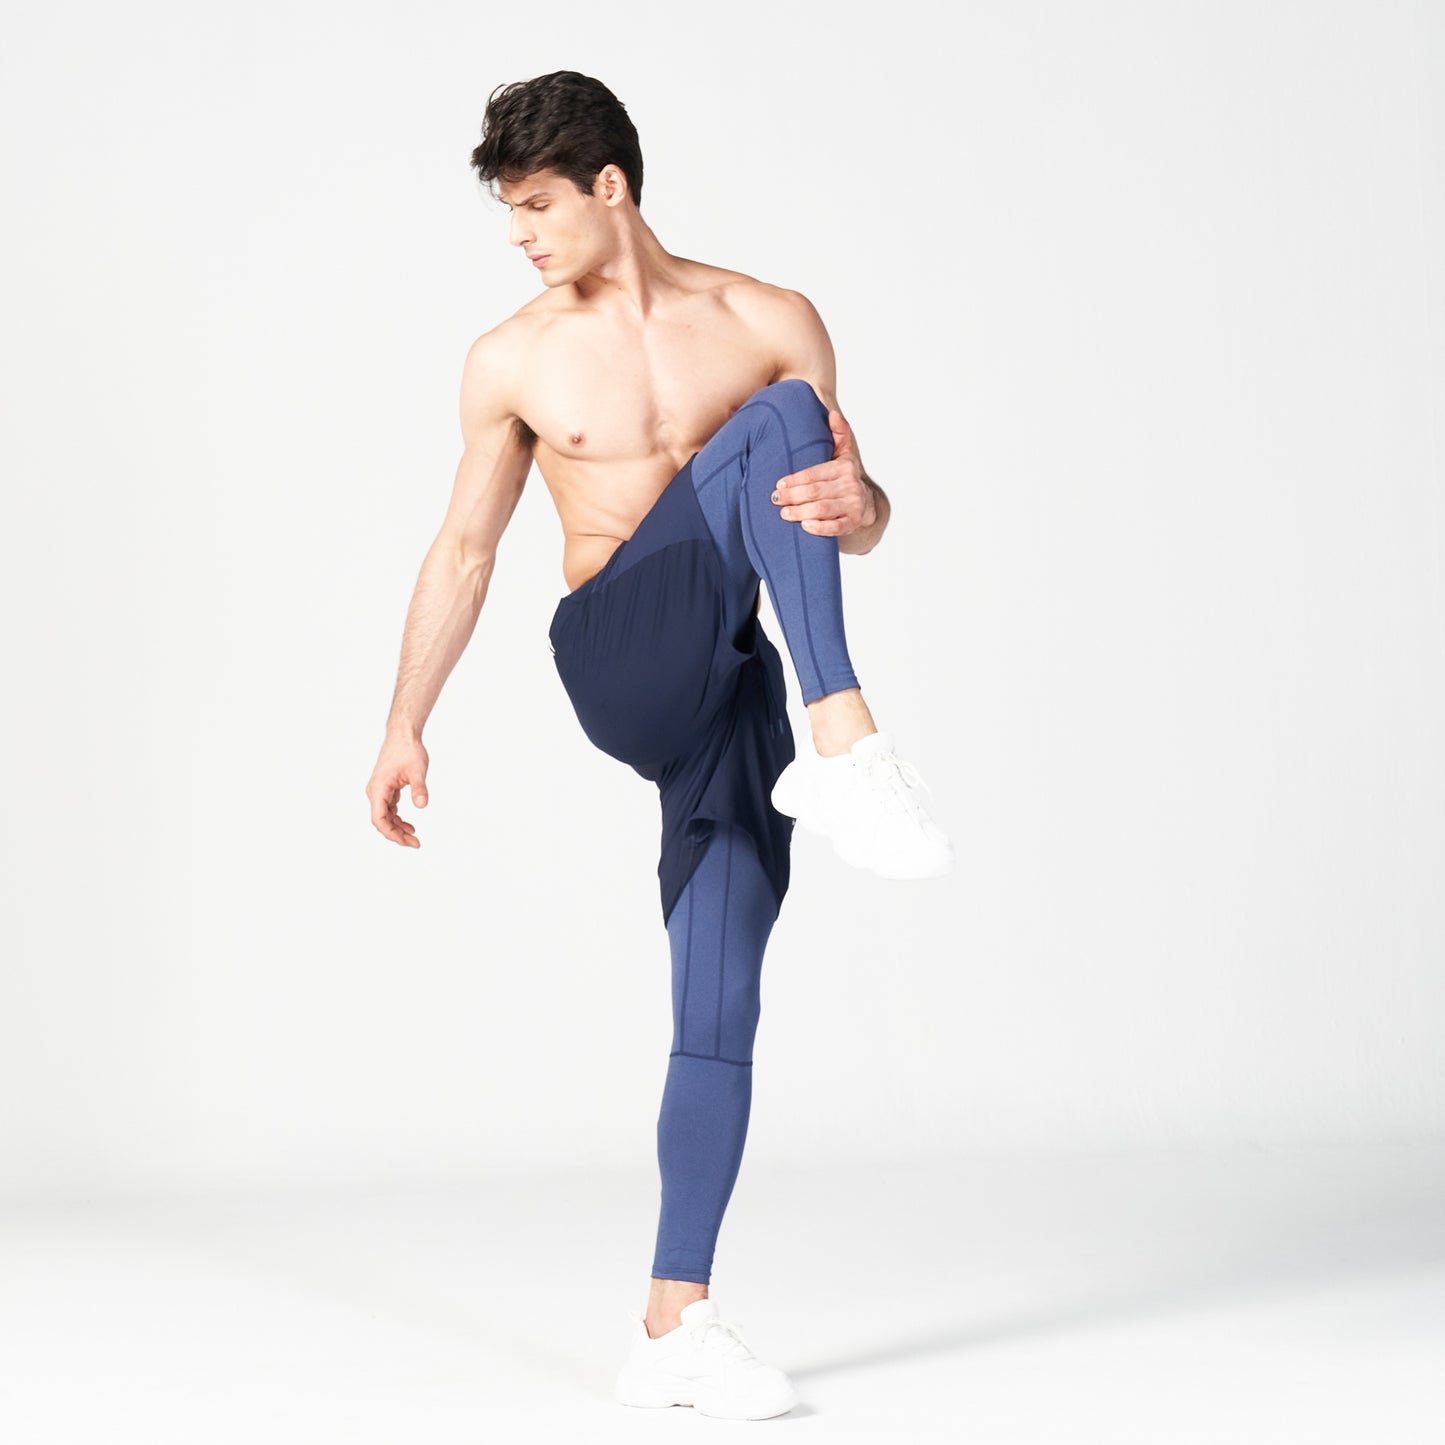 squatwolf-gym-wear-core-protech-tights-navy-marl-workout tights-for-men